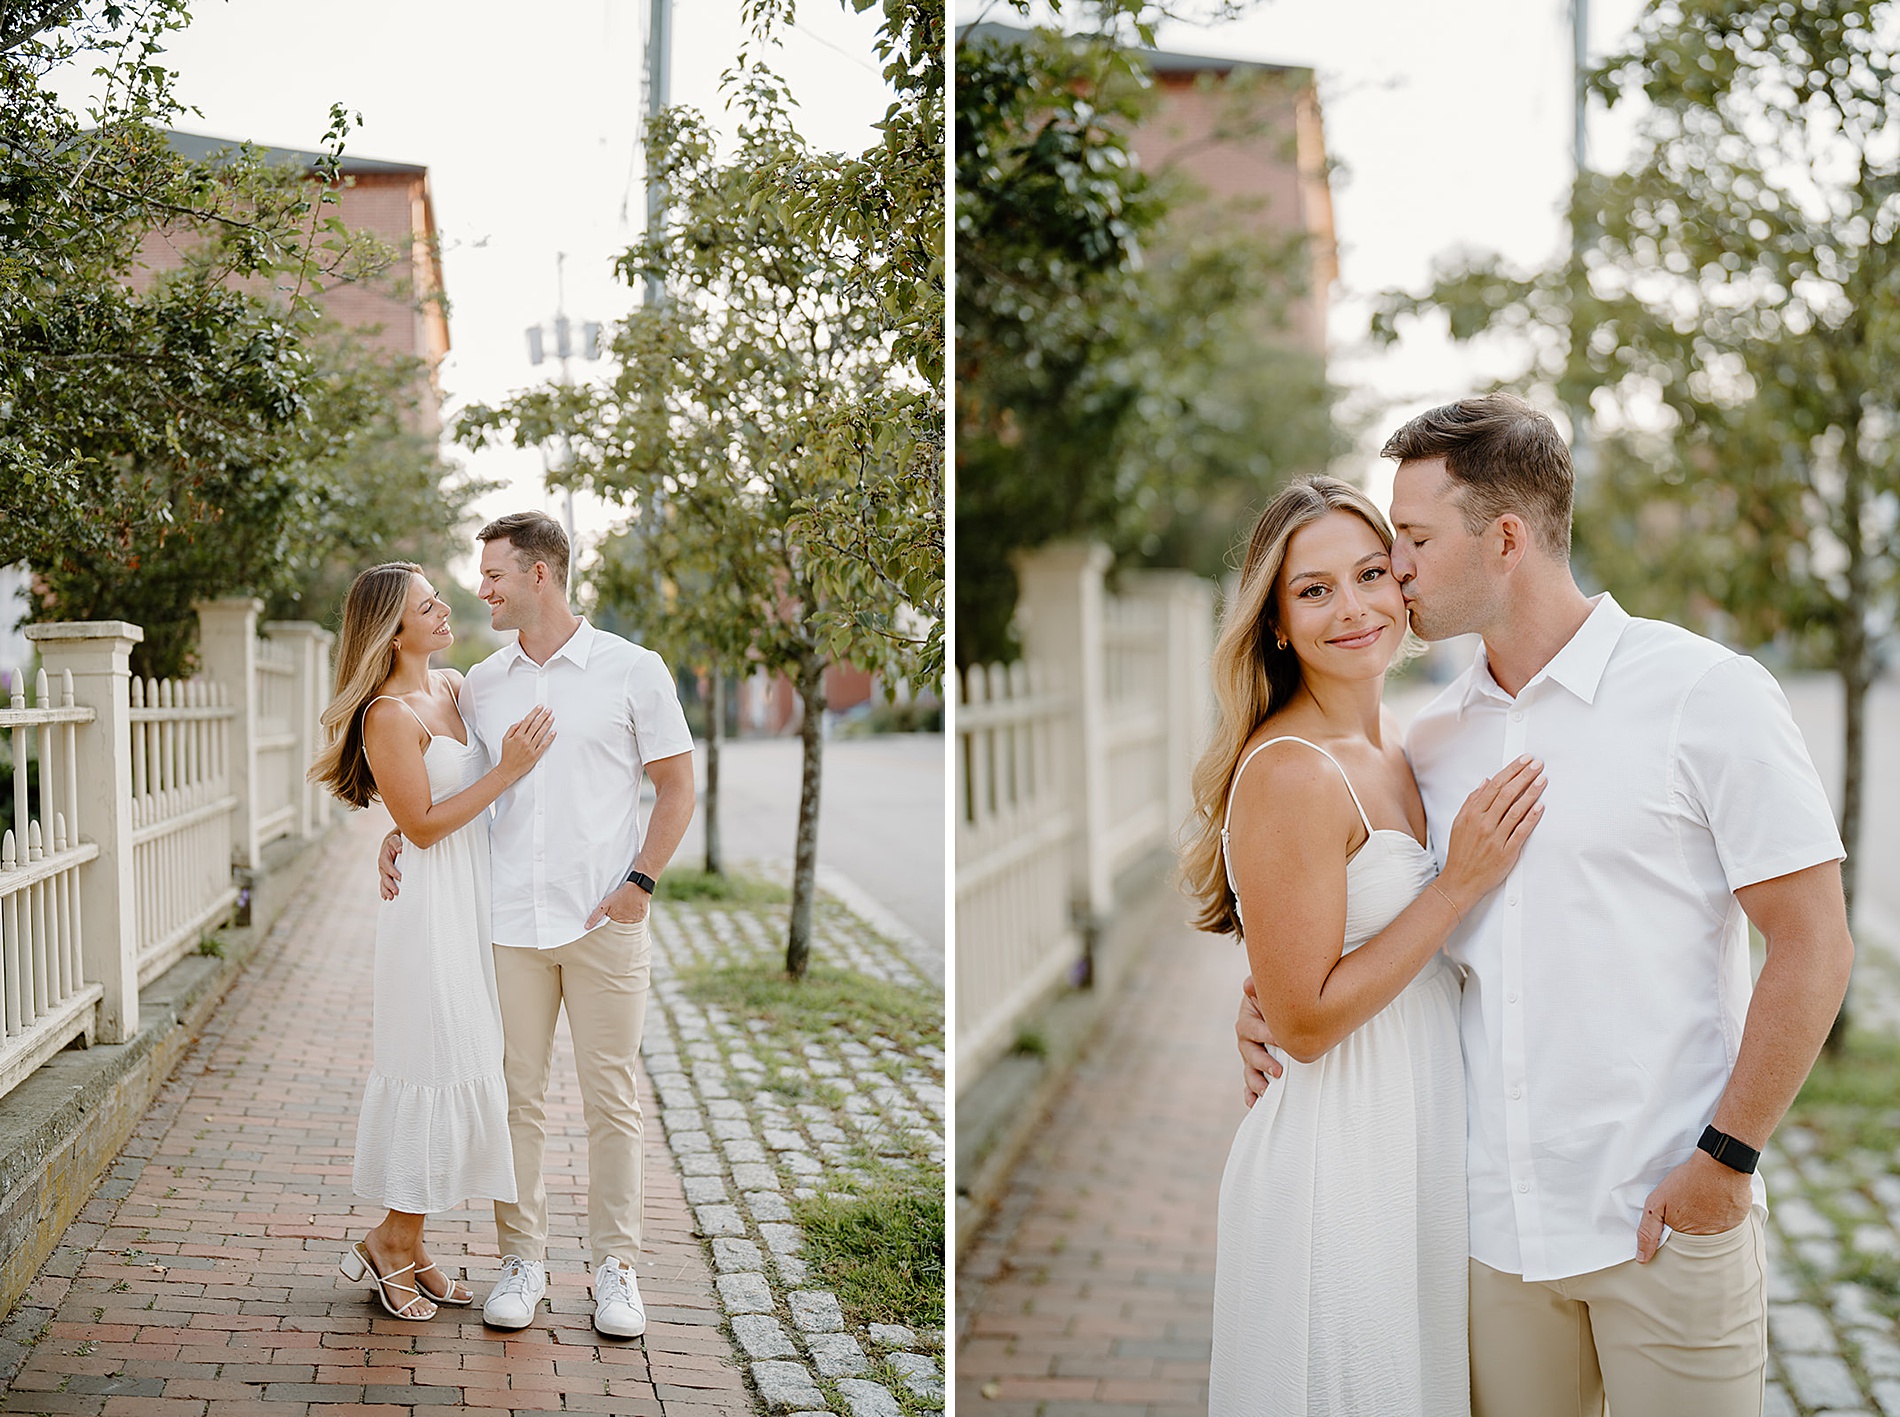 Tips For Choosing Your Engagement Outfits by Luxury NH wedding photographer, Breonna Wells